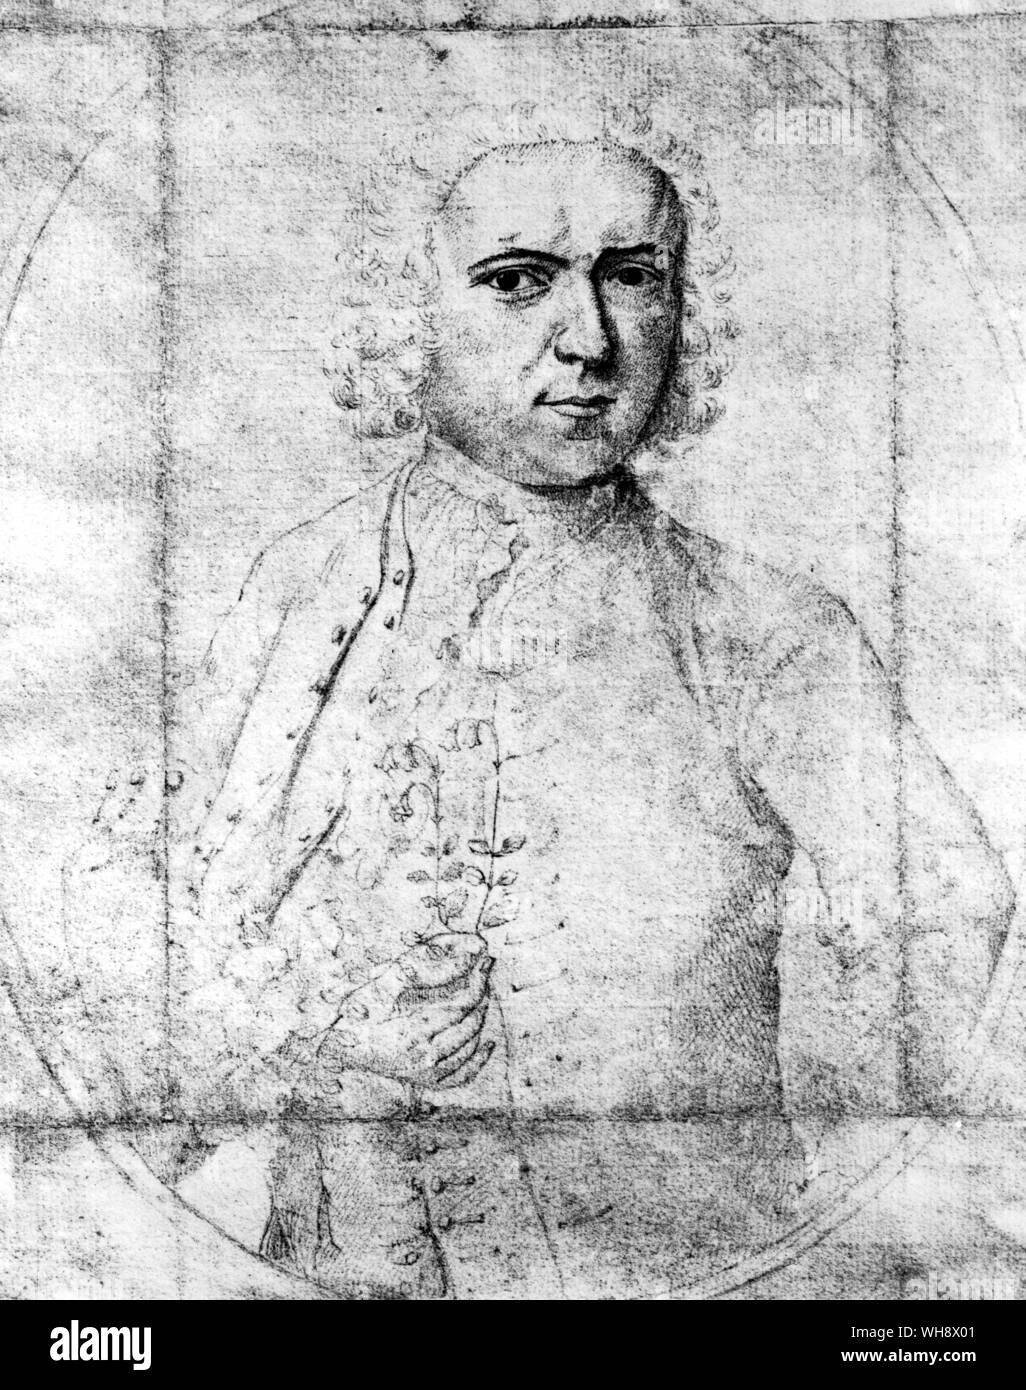 Carl LInaeus as a young man, anonymous drawing Stock Photo